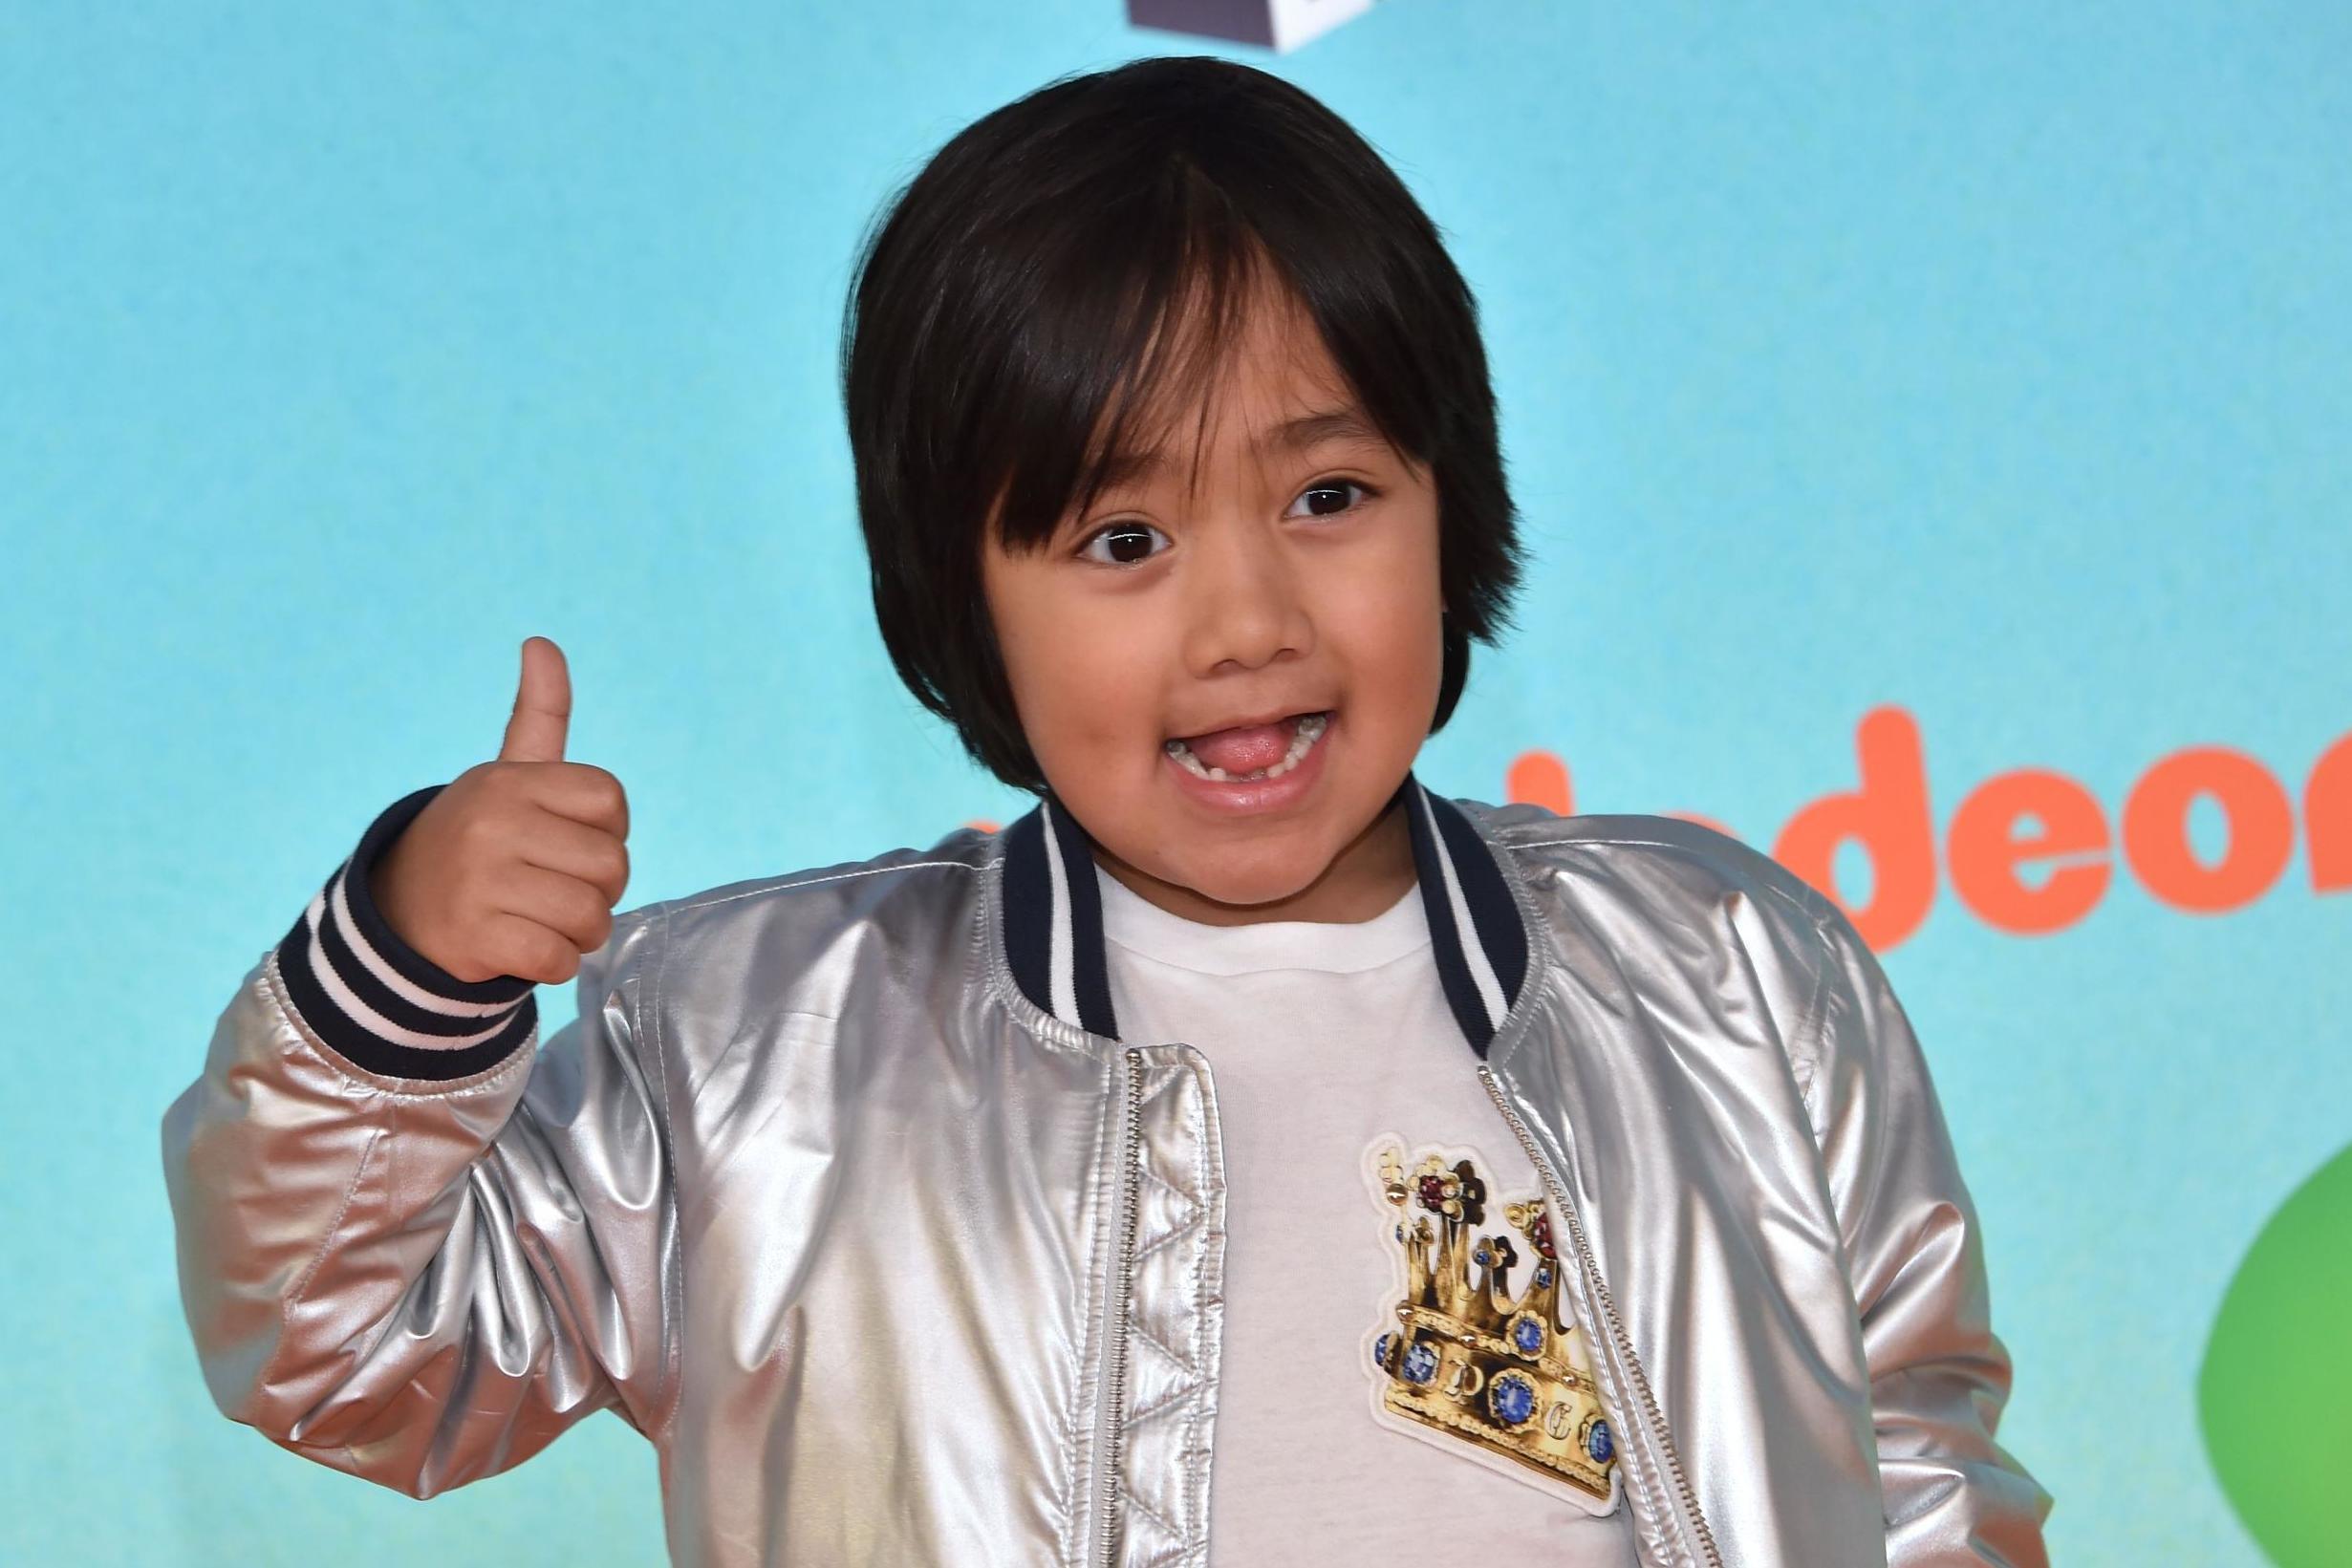 Ryan ToysReview accused of misleading preschoolers with sponsored content (Getty)